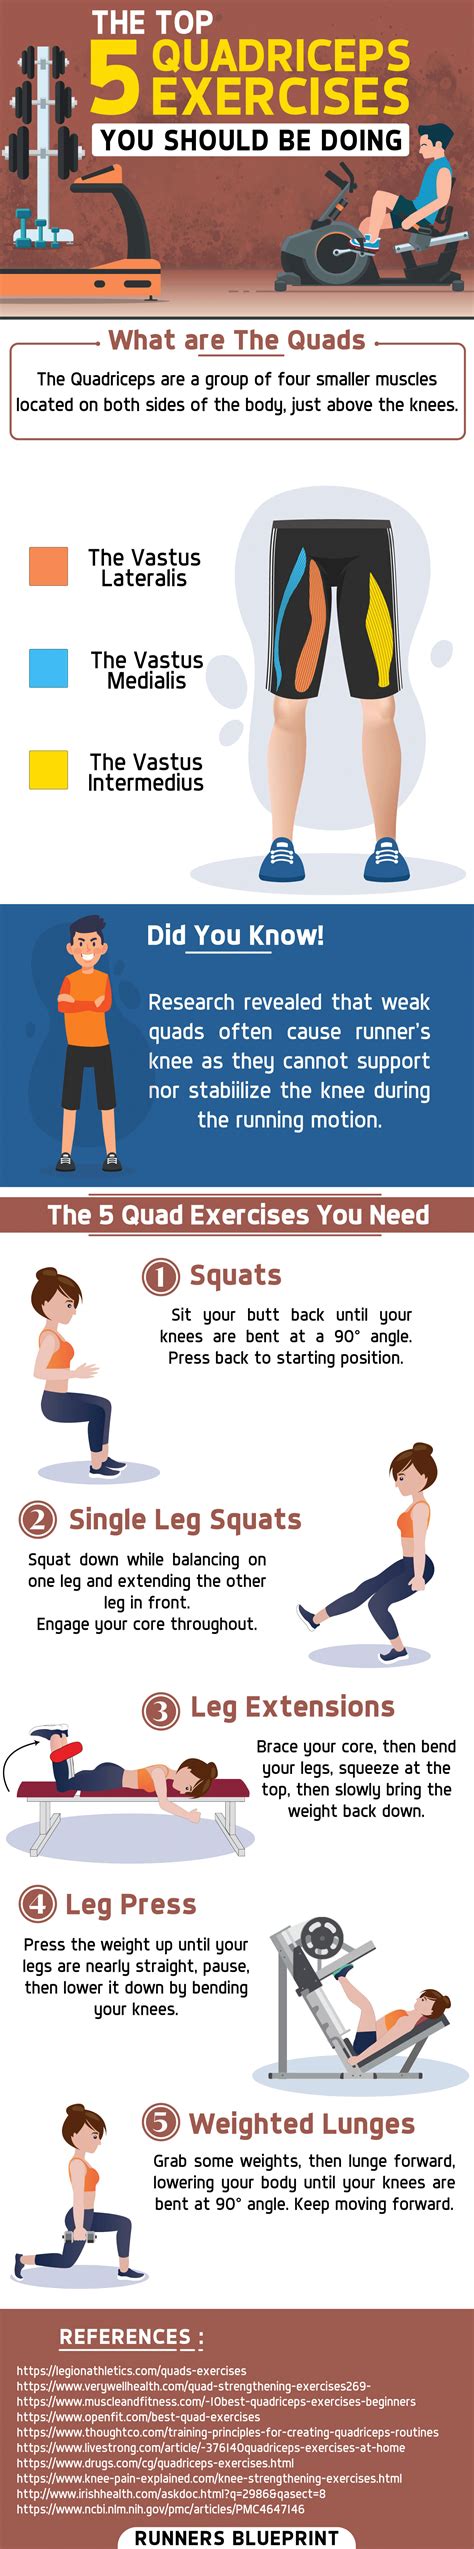 5 Must Quadriceps Exercises The 30 Minute Quad Workout Routine You Need